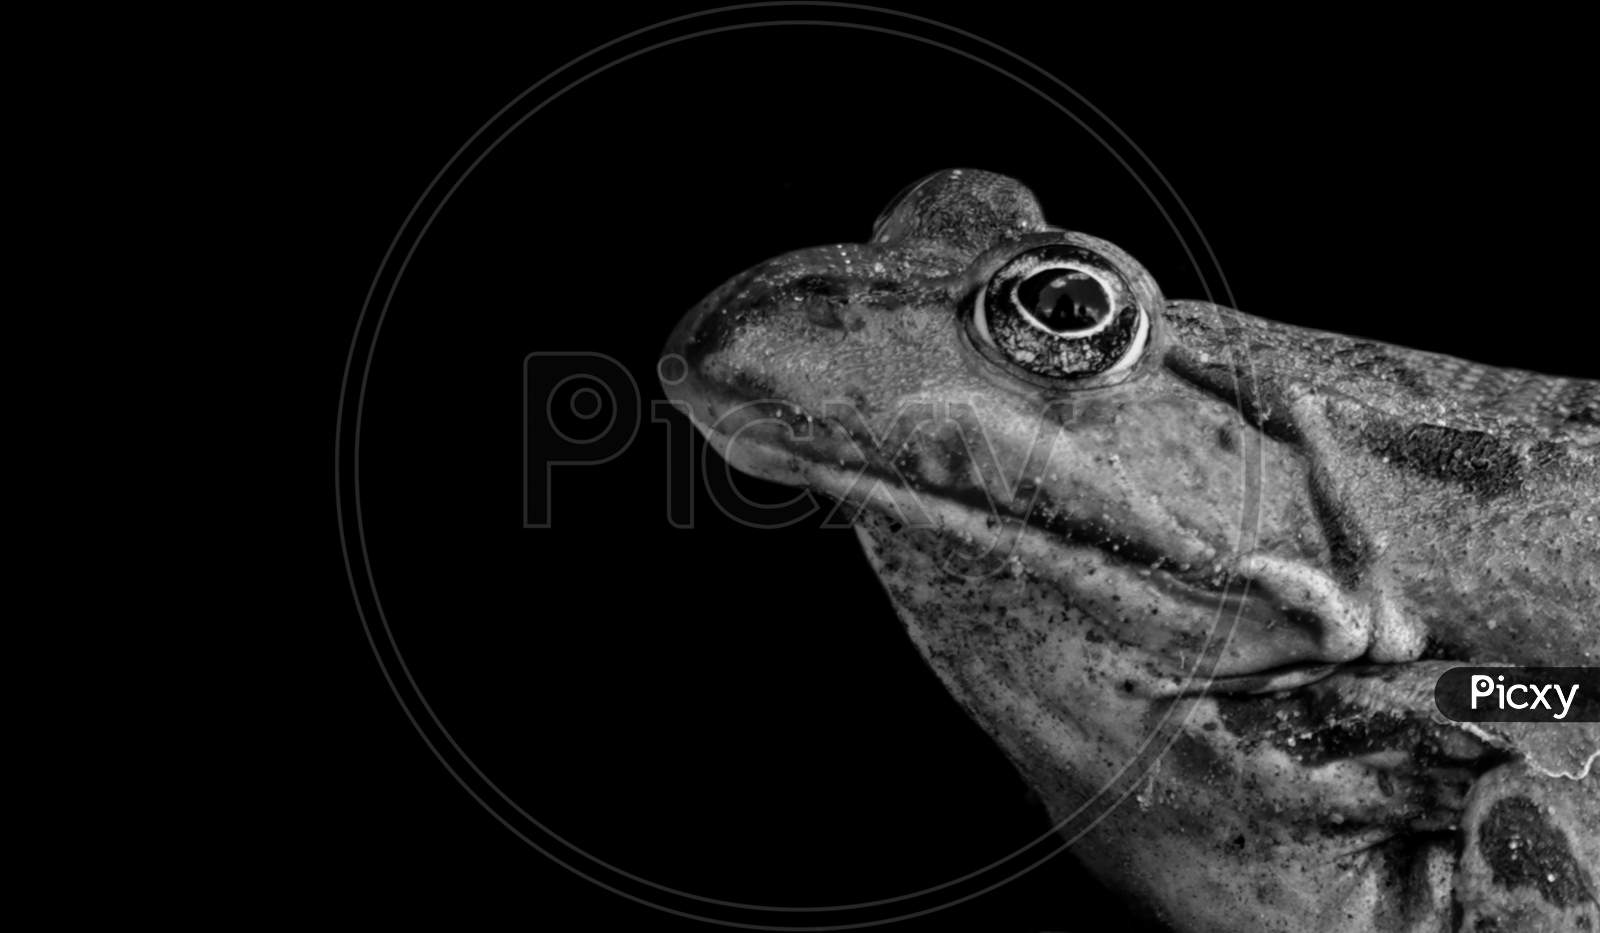 Frog Looking Up And Closeup Face In The Black Background